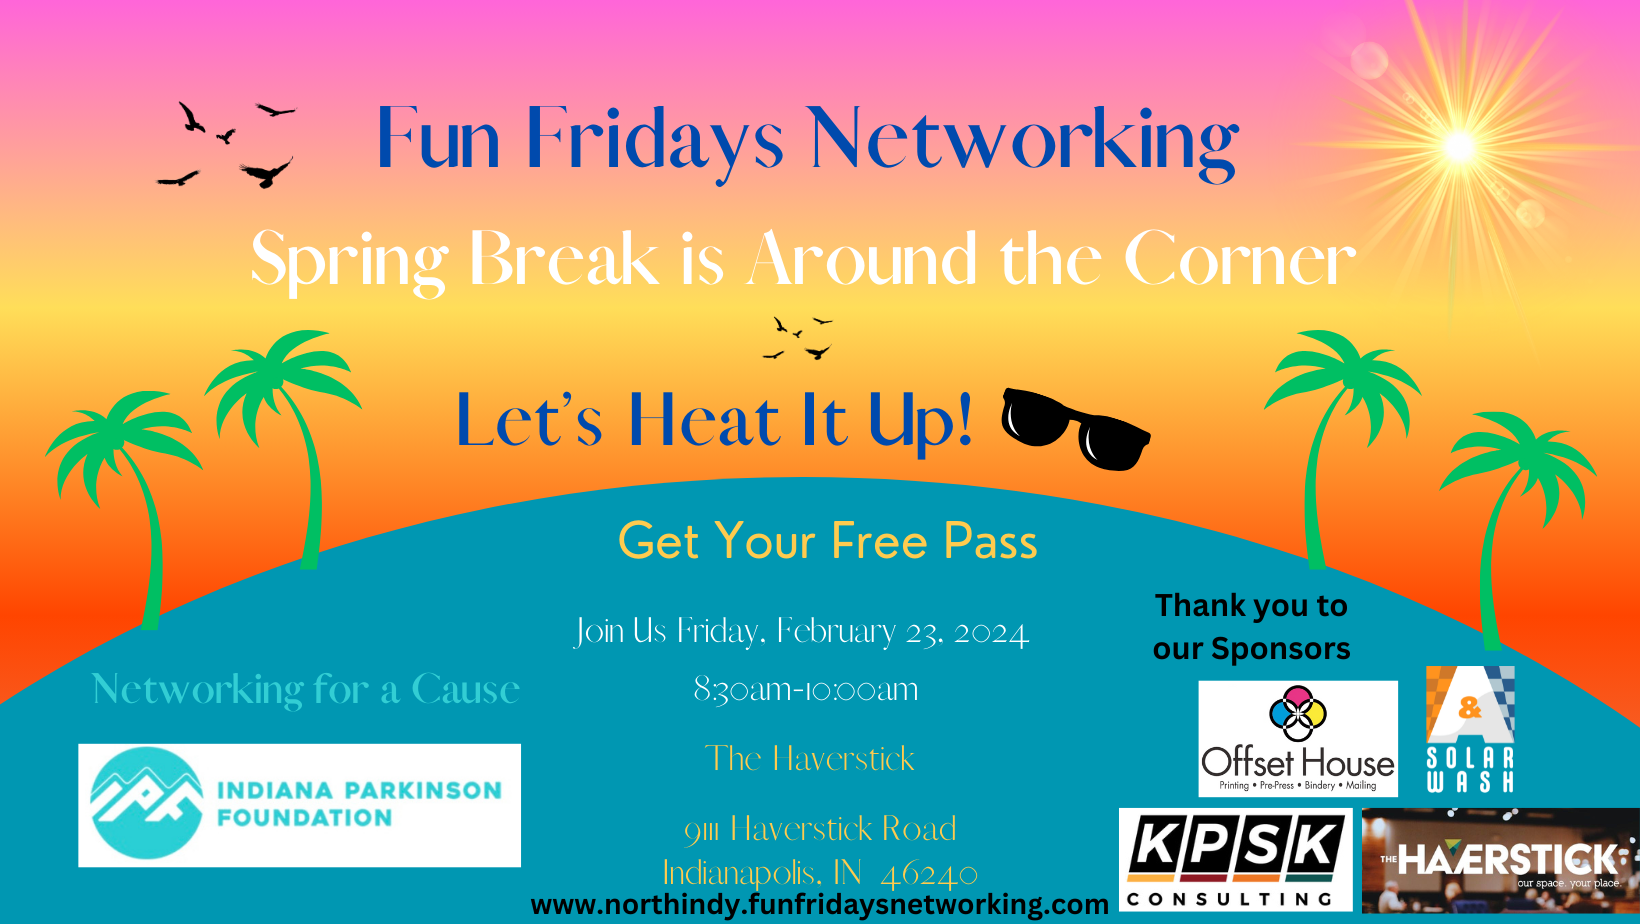 Fun Fridays Networking- Friday, February 23, 2024- RSVP NOW!